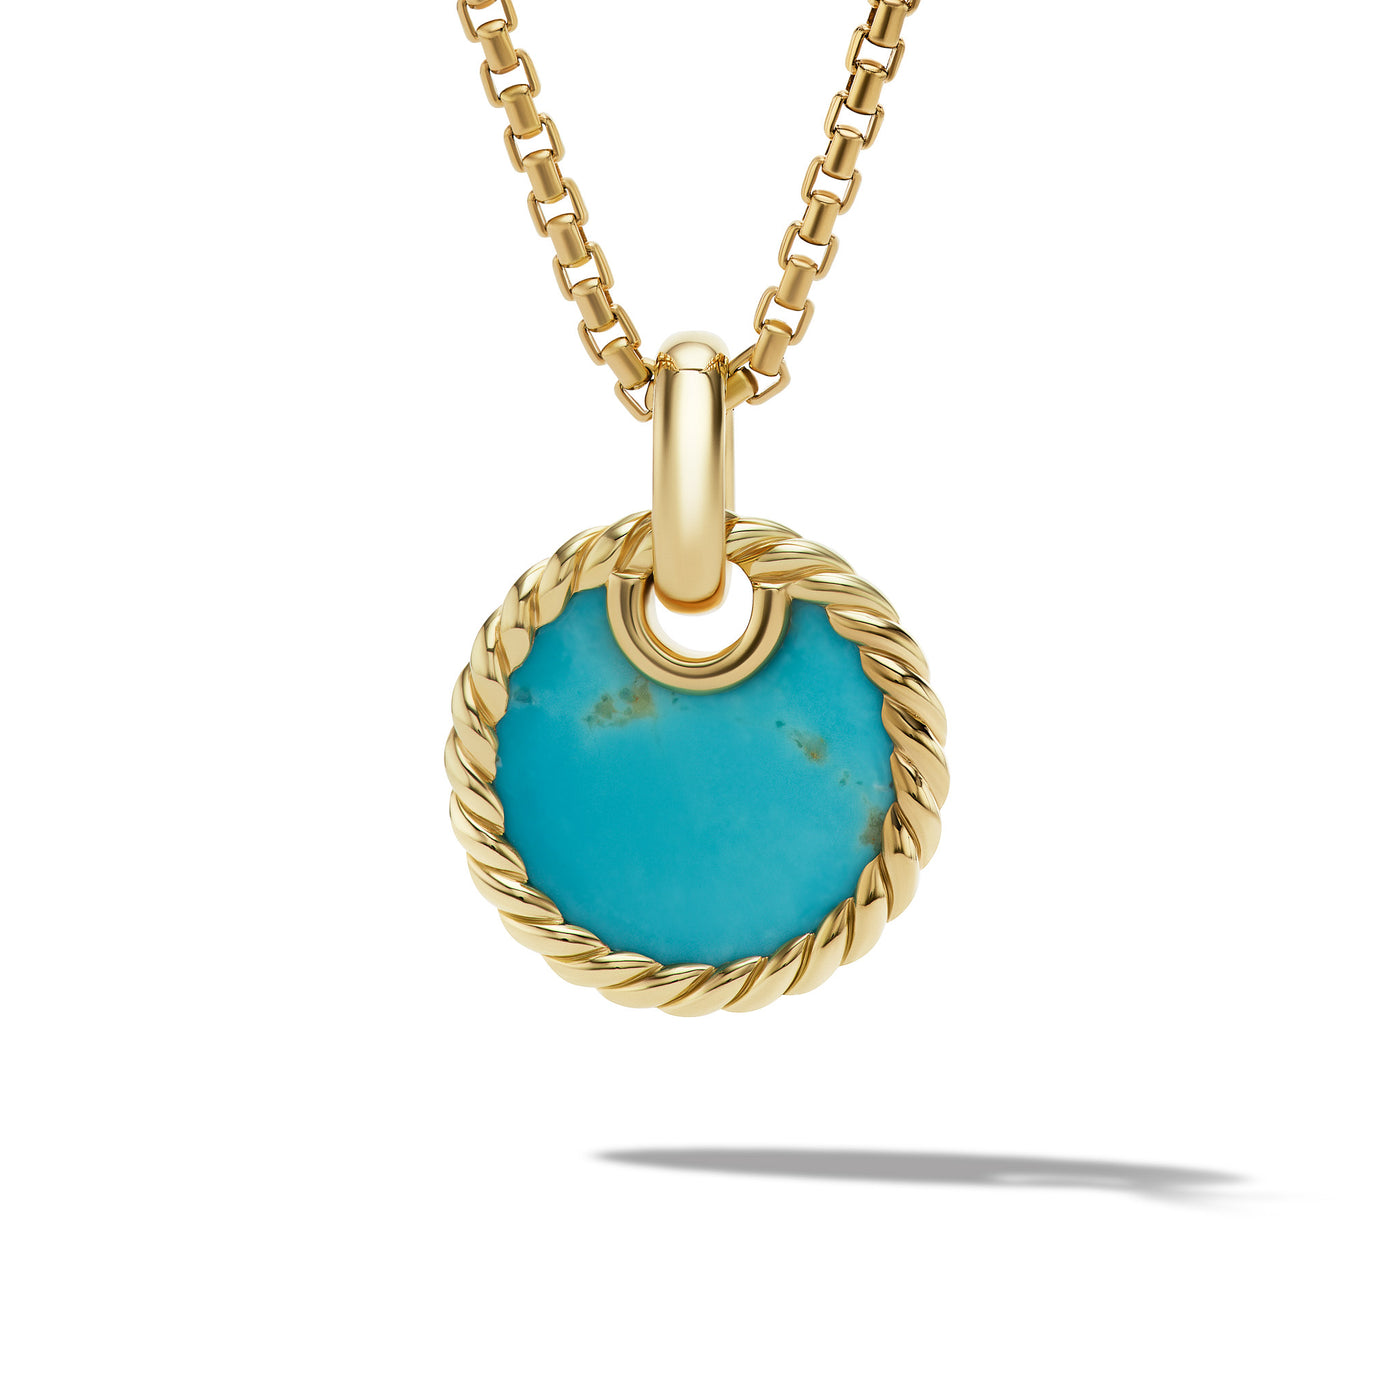 DY Elements® Disc Pendant in 18K Yellow Gold with Turquoise, 15.5mm